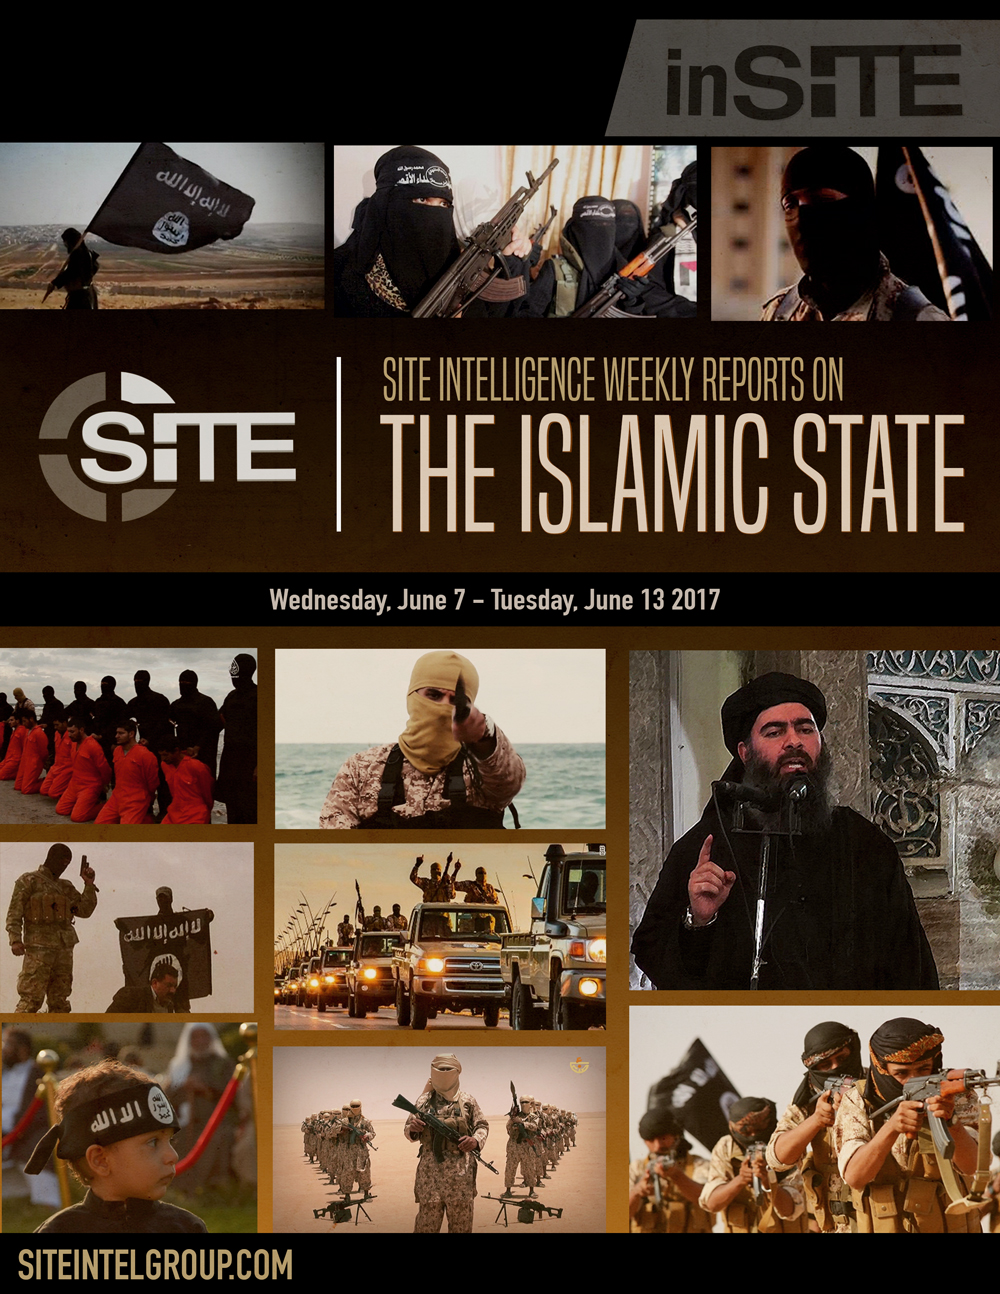 Weekly inSITE on the Islamic State, June 14 - 20, 2017